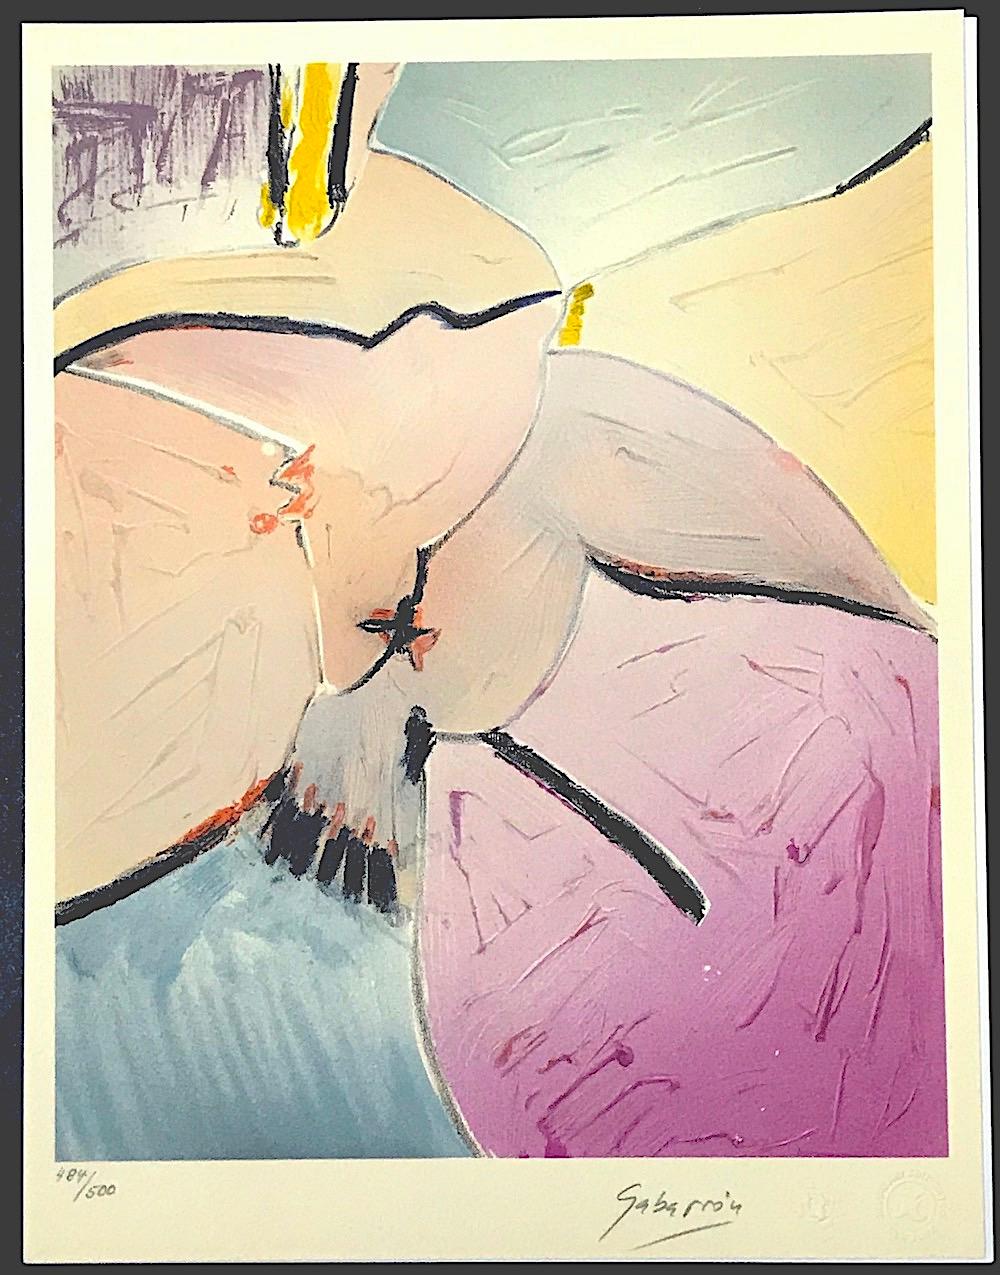 HOPES FOR PEACE is a handmade color lithograph by the internationally recognized Spanish artist Cristóbal Gabarrón printed on archival Arches printmaking paper in 1986. HOPES FOR PEACE is an imaginative composition depicting an abstract bird